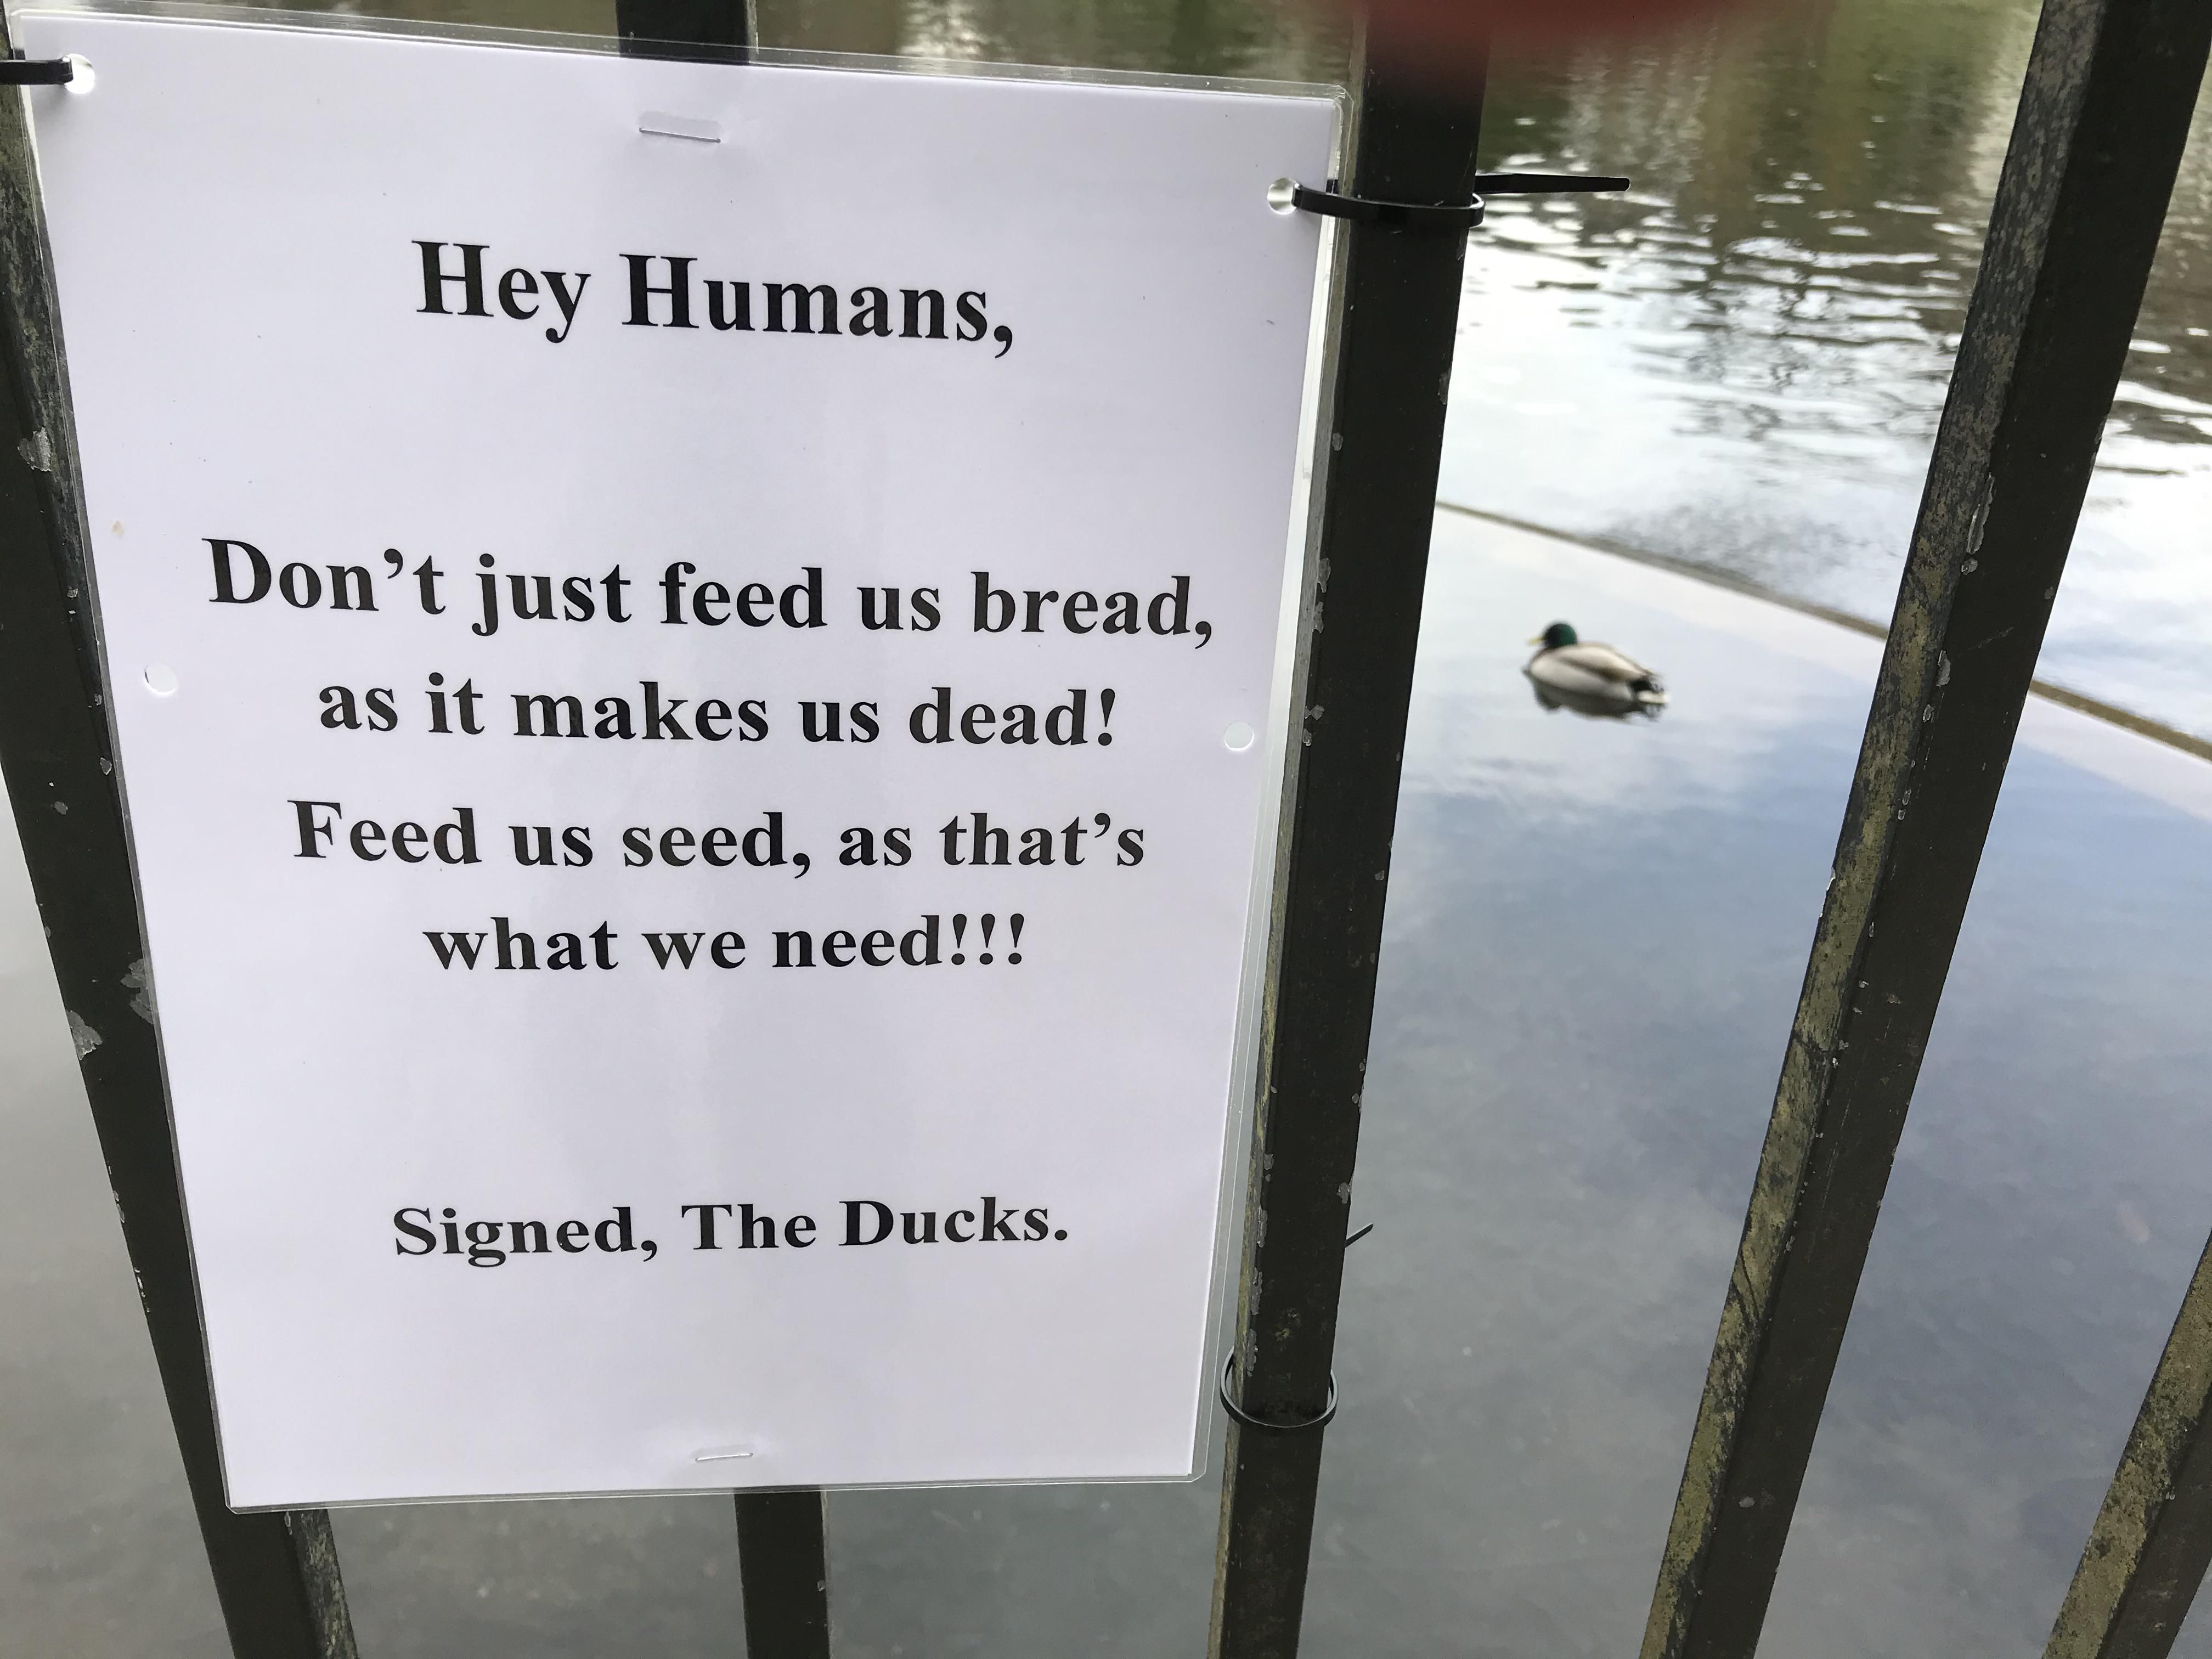 I shall respect your wishes Mr Duck